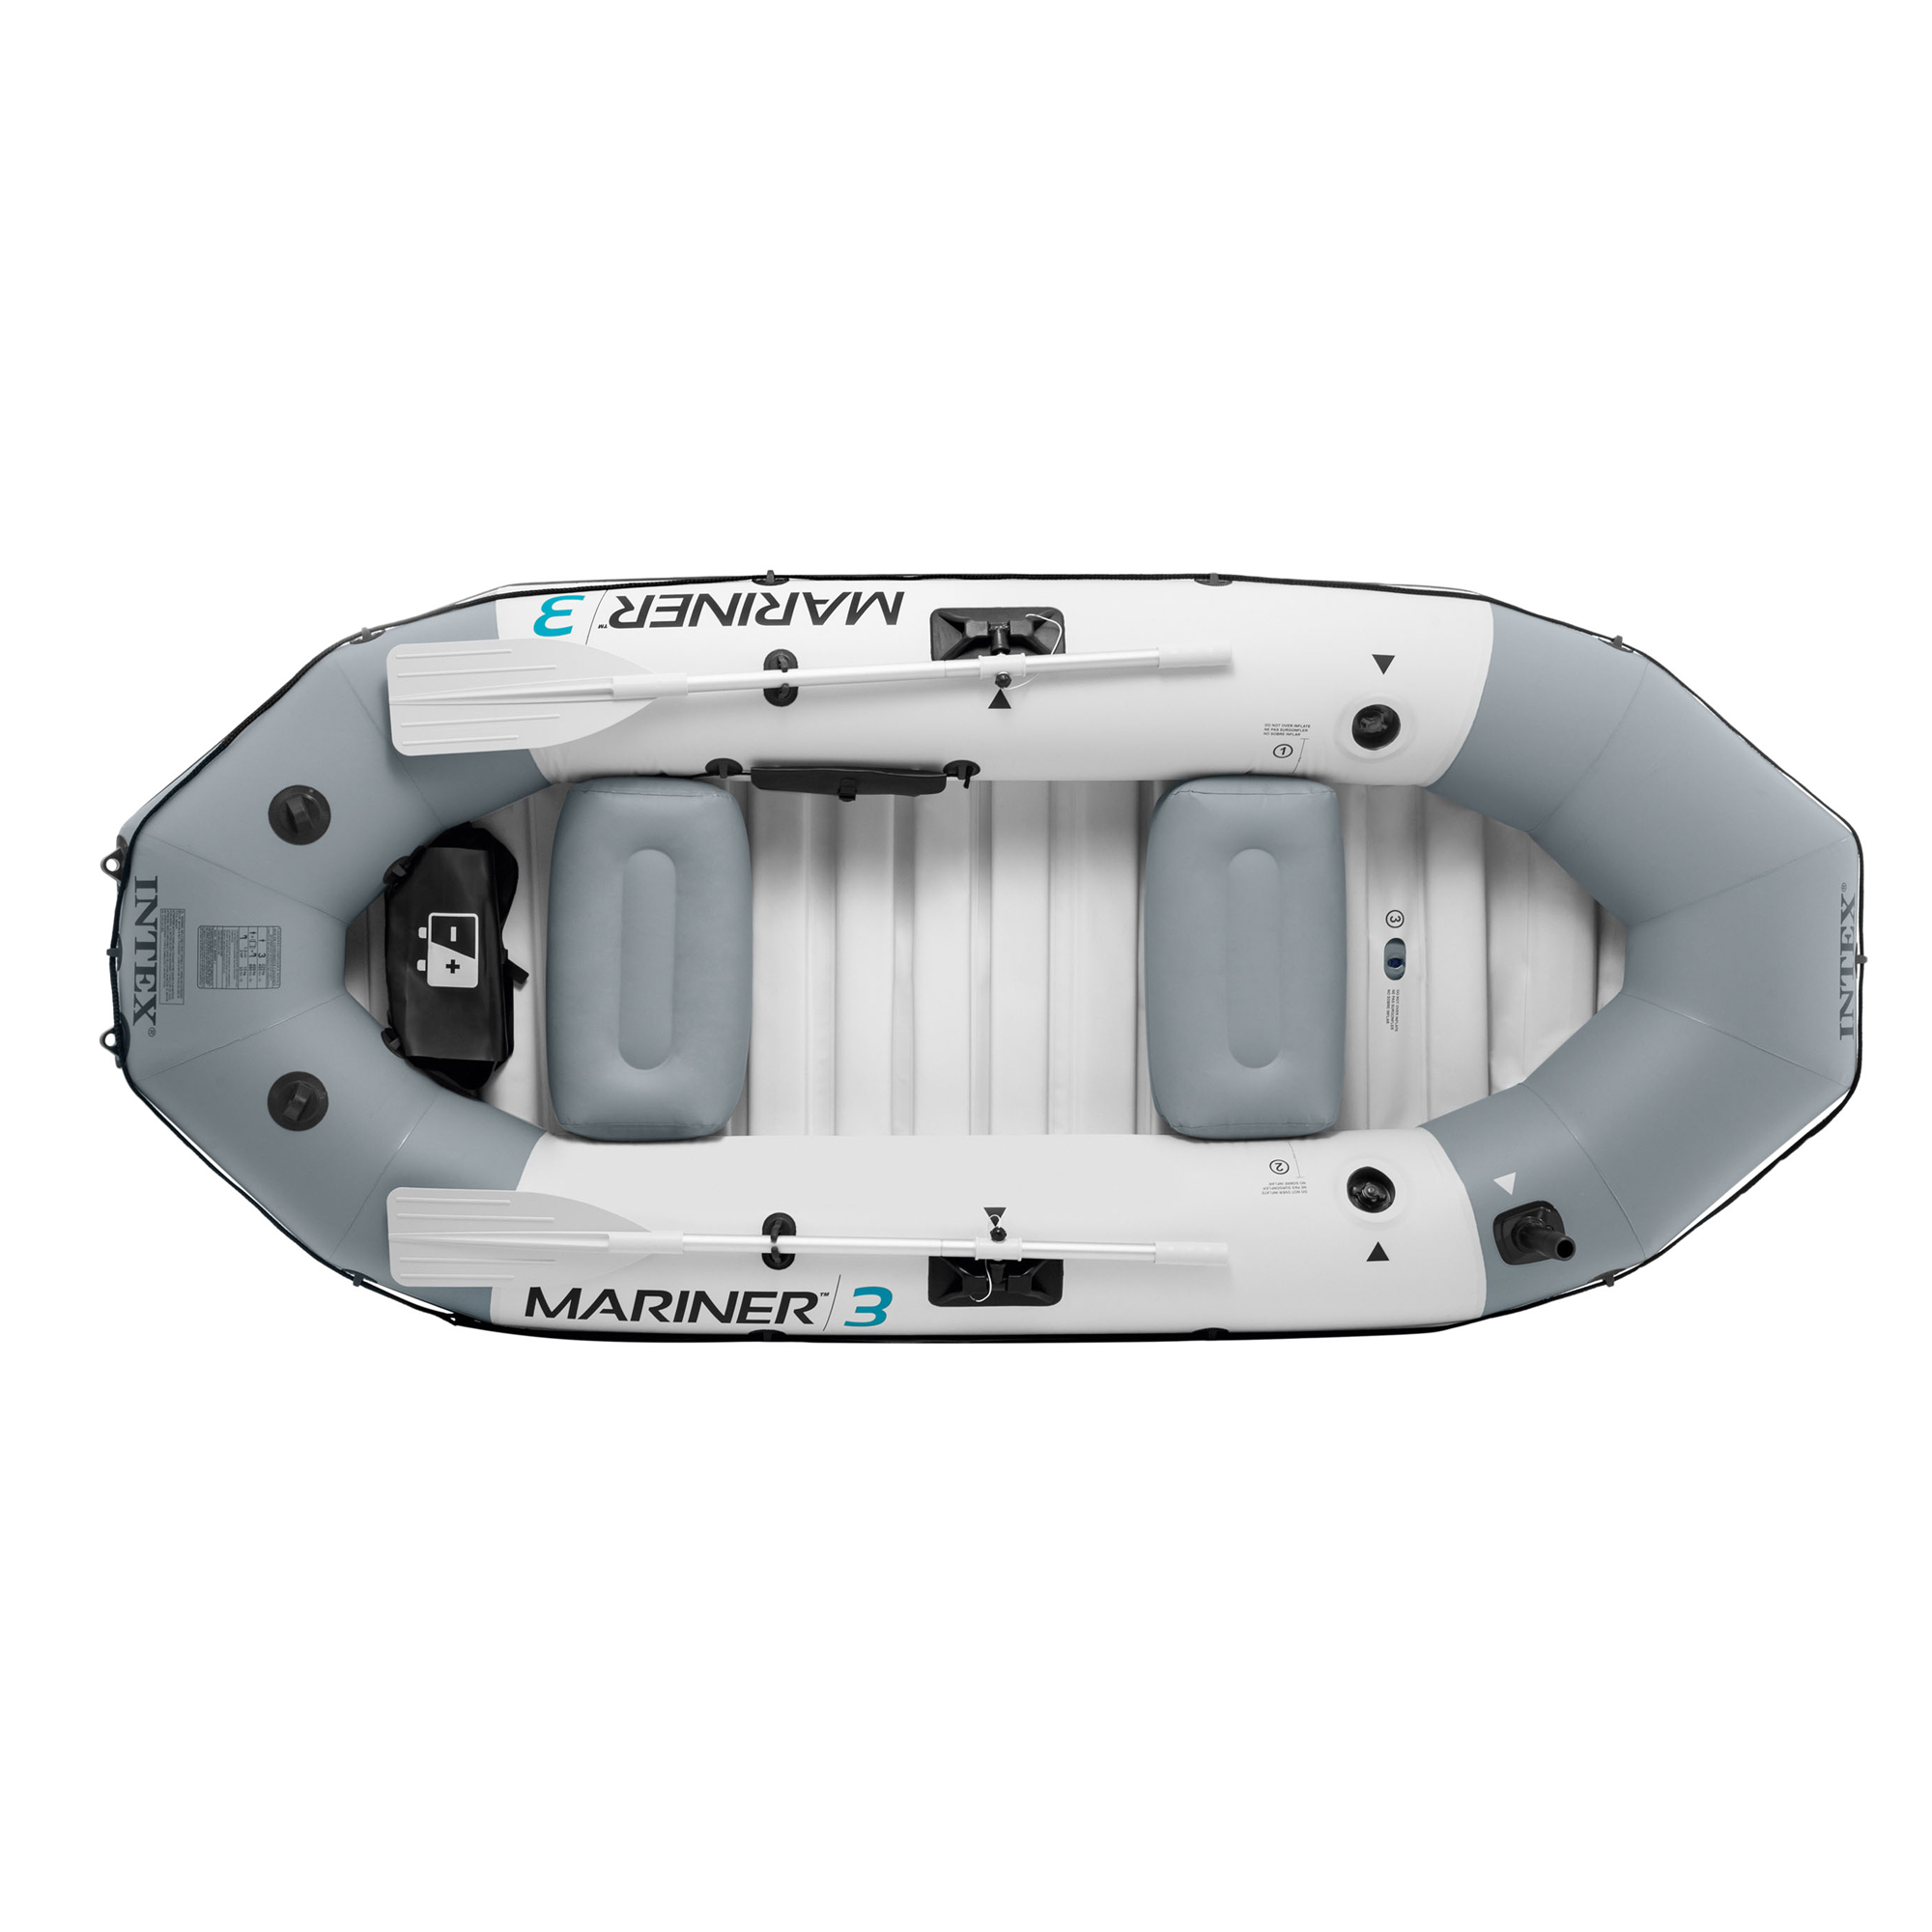 Intex Mariner 3, 3-Person Inflatable River/Lake Dinghy Boat & Oars Set - image 2 of 12